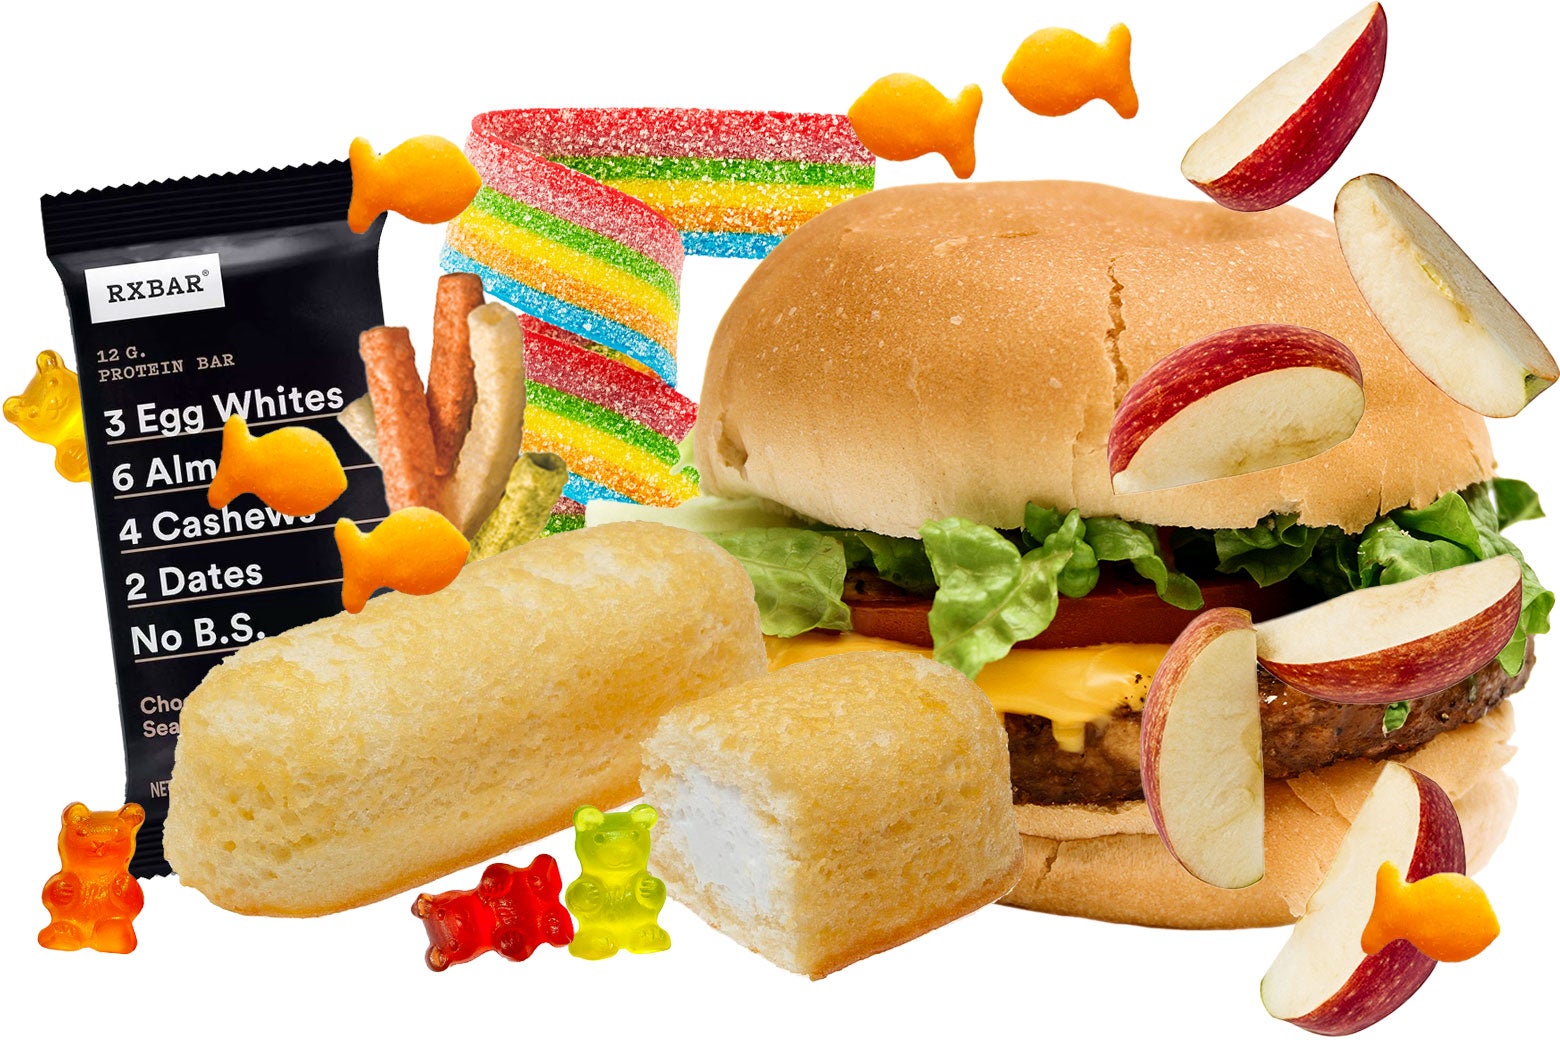 Ultra-Processed Foods Bad for Us